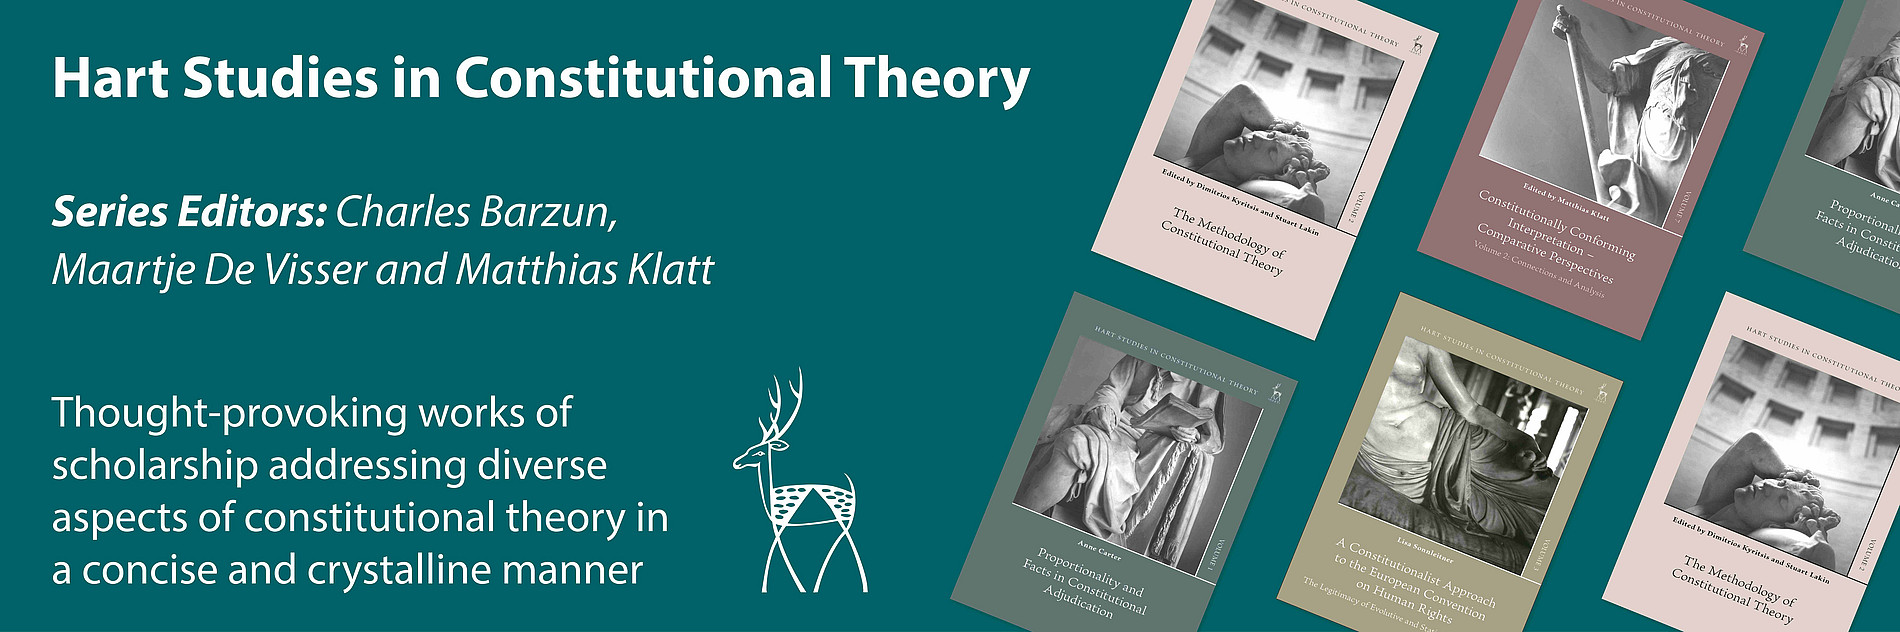 Banner der Hart Series in Constitutional Theory ©Bloomsbury Publishing India Pvt. Ltd.